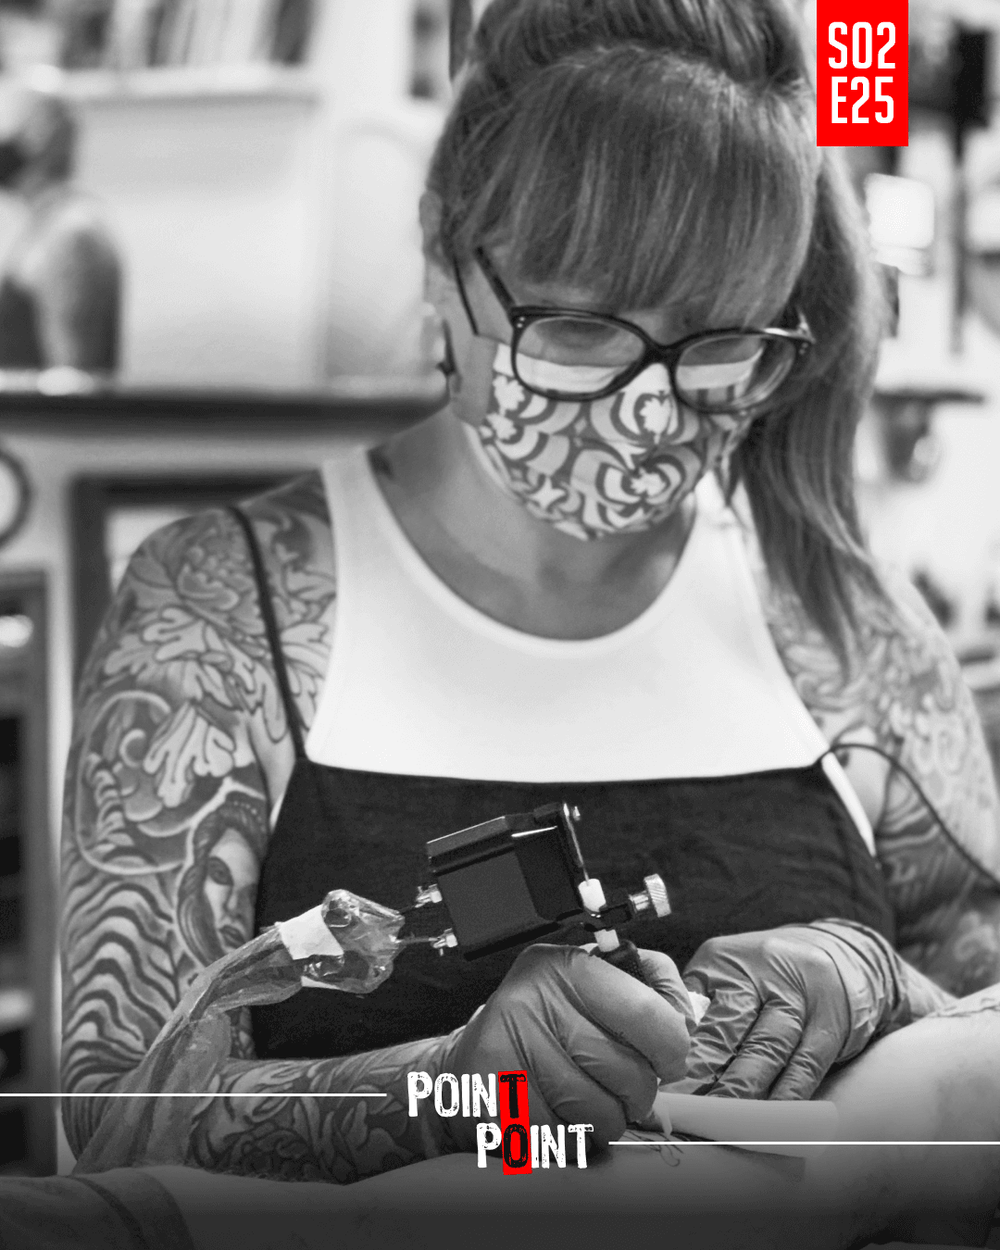 Dominique Bodkin Talks Family Tattooing Tradition, Her Machine Collection And Finding Life Balance...